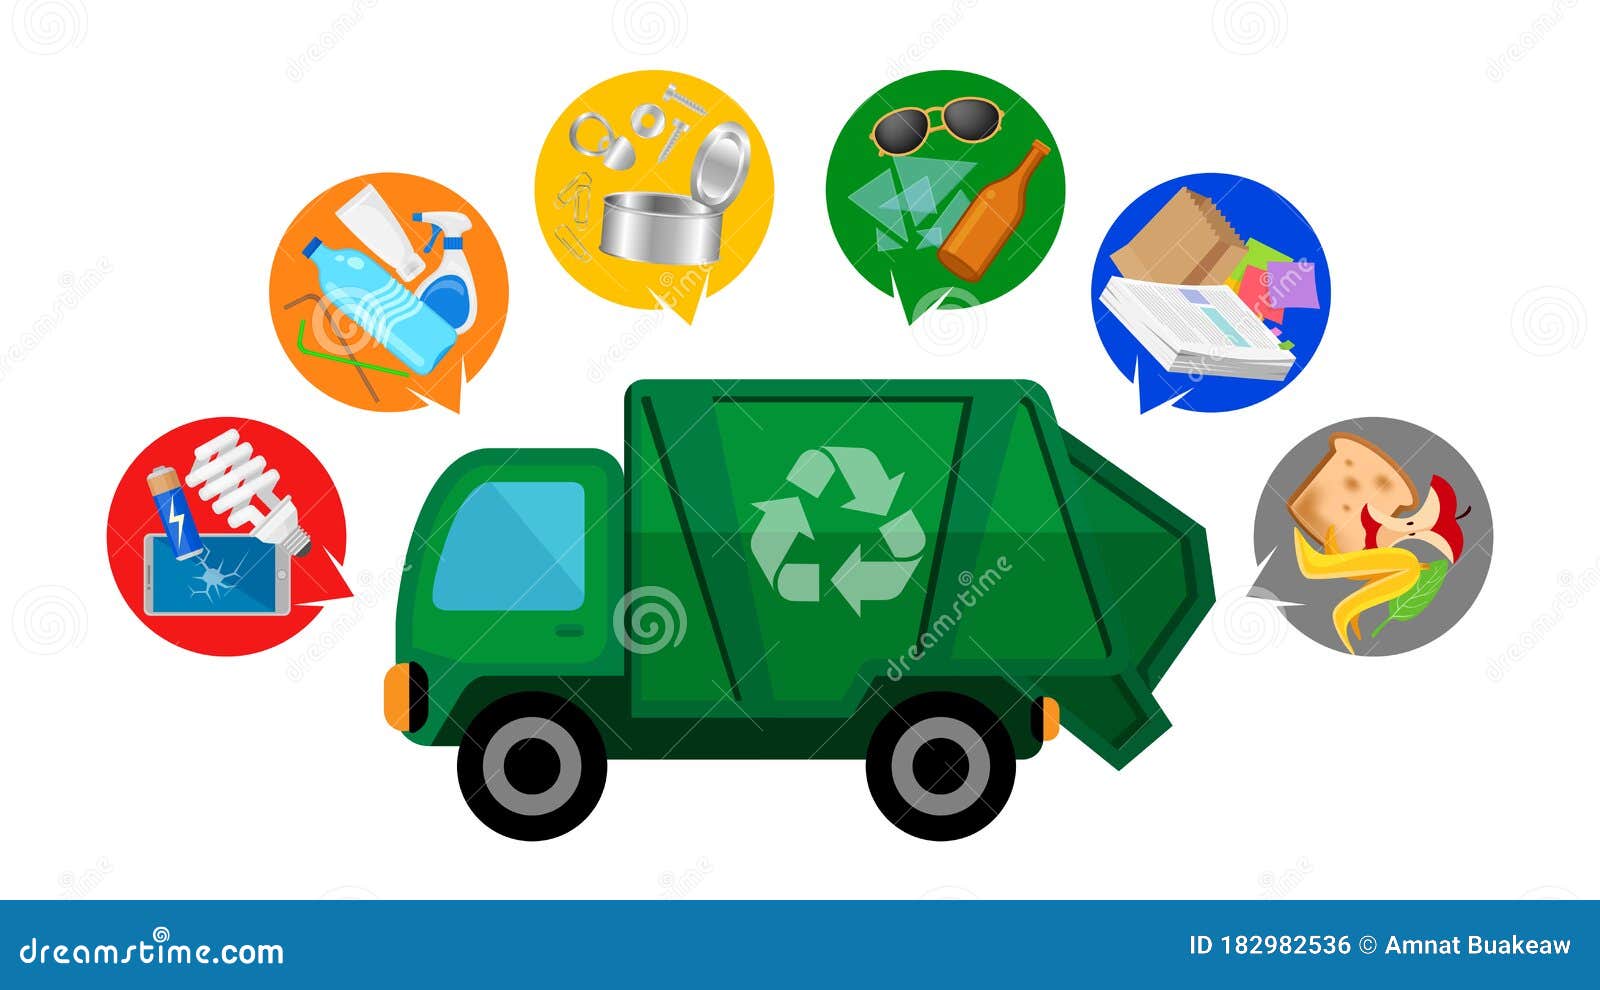 Garbage Truck and Waste Isolated on White Background, Clip Art of Recycle  Waste Truck for Cleaner Management, Garbage Truck Icon Stock Vector -  Illustration of rubbish, metal: 182982536